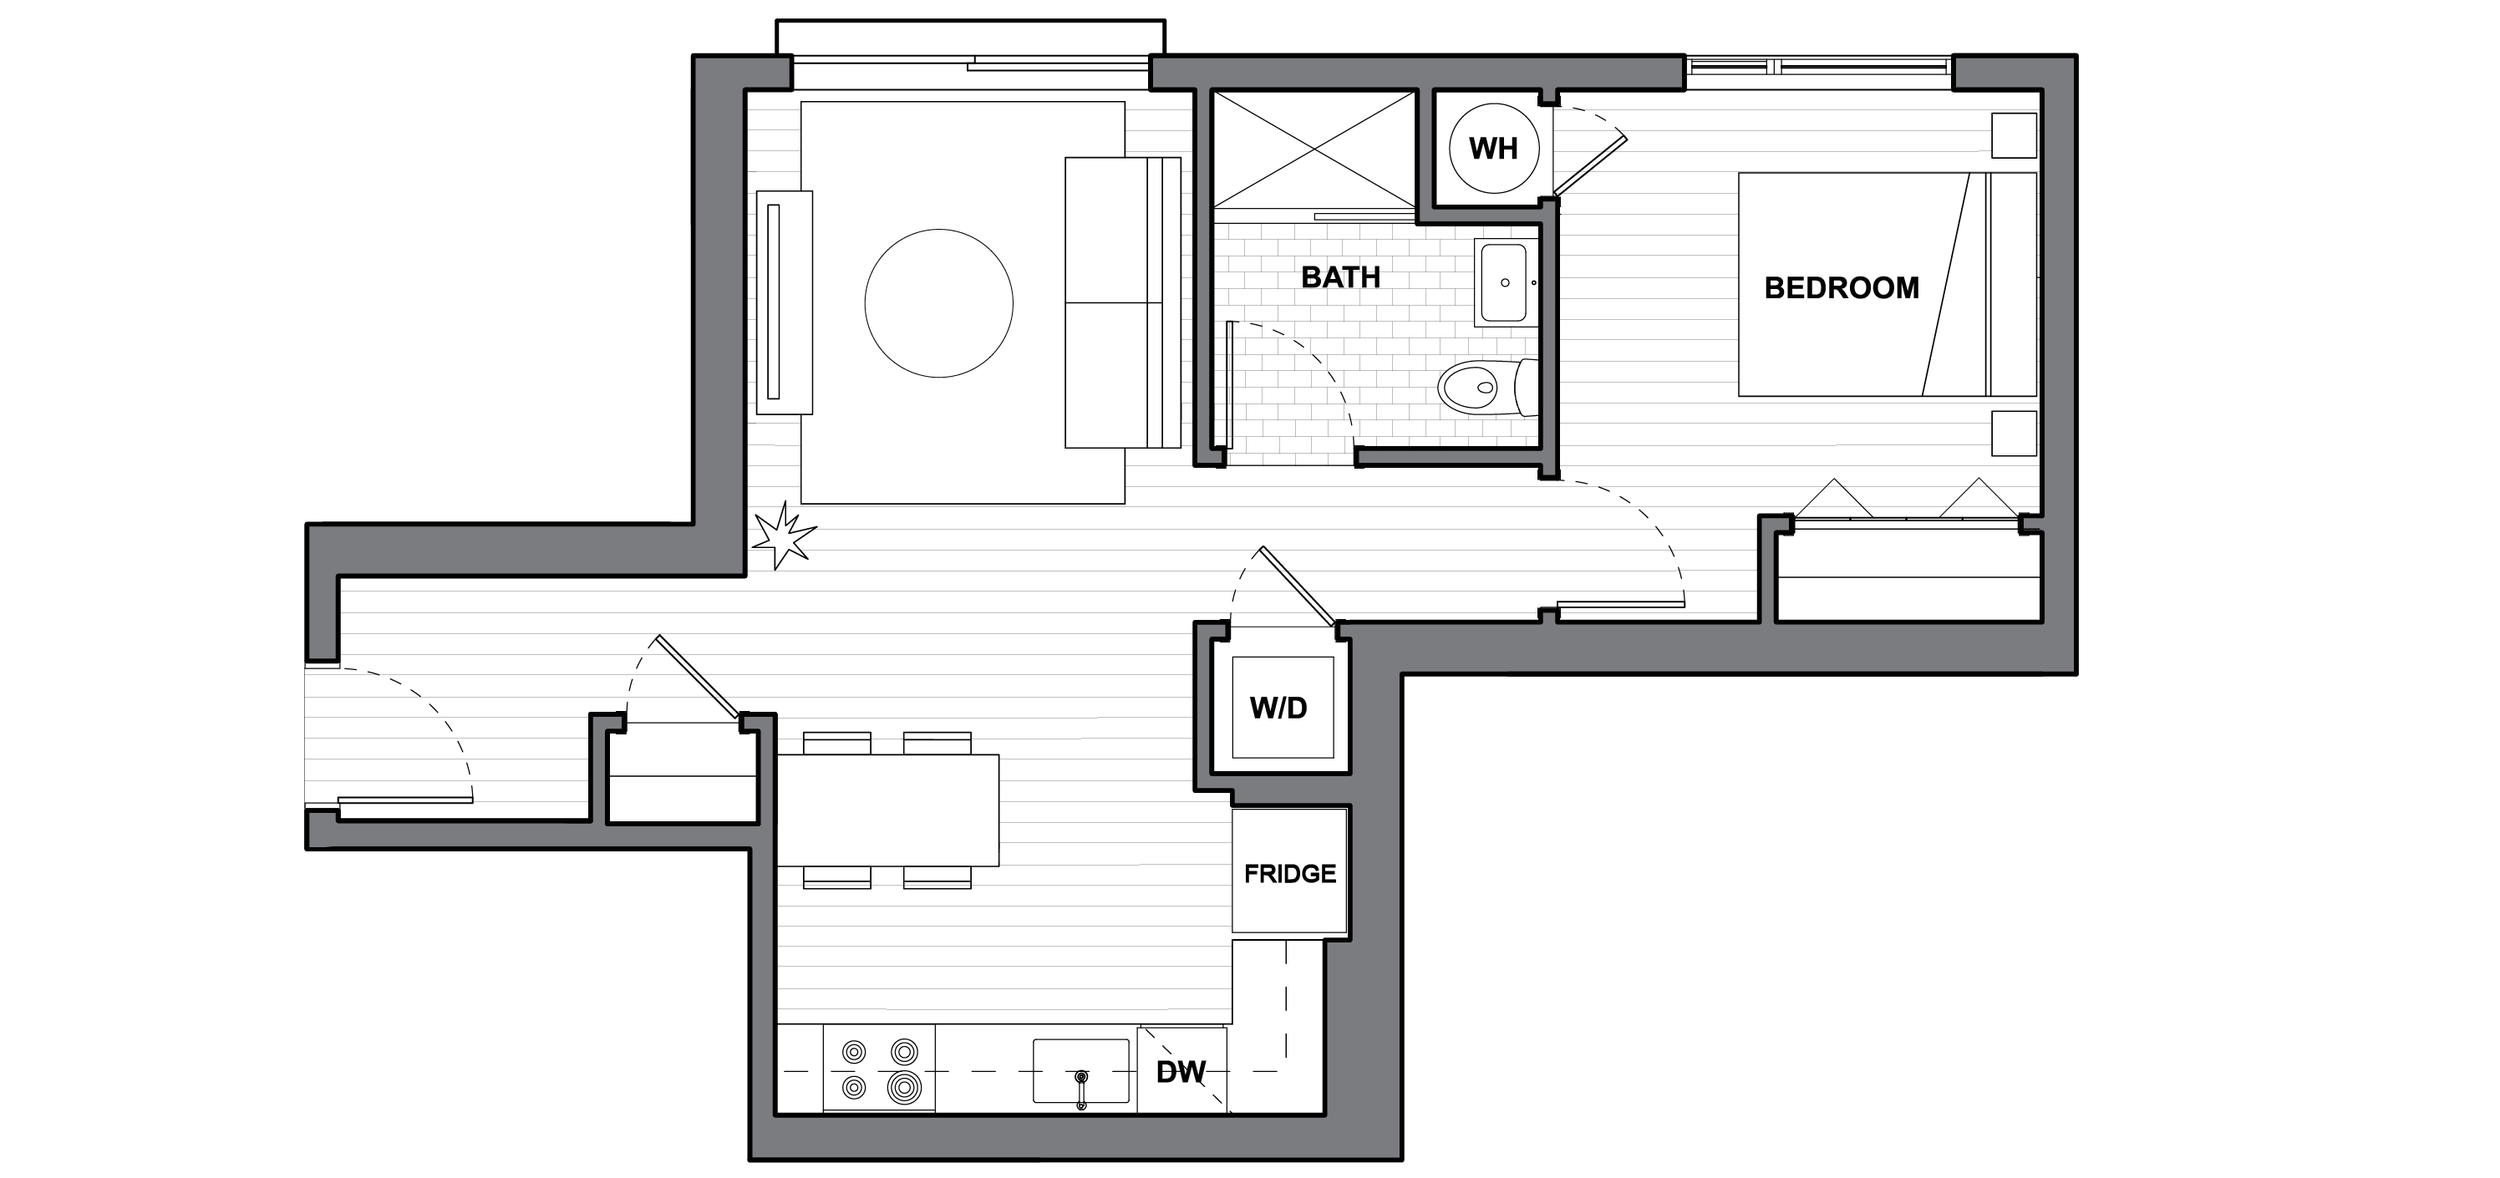   UNIT 207  1 BEDROOM / 1 BATH 612 SQUARE FEET   REQUEST INFORMATION / APPLY FOR THIS UNIT   